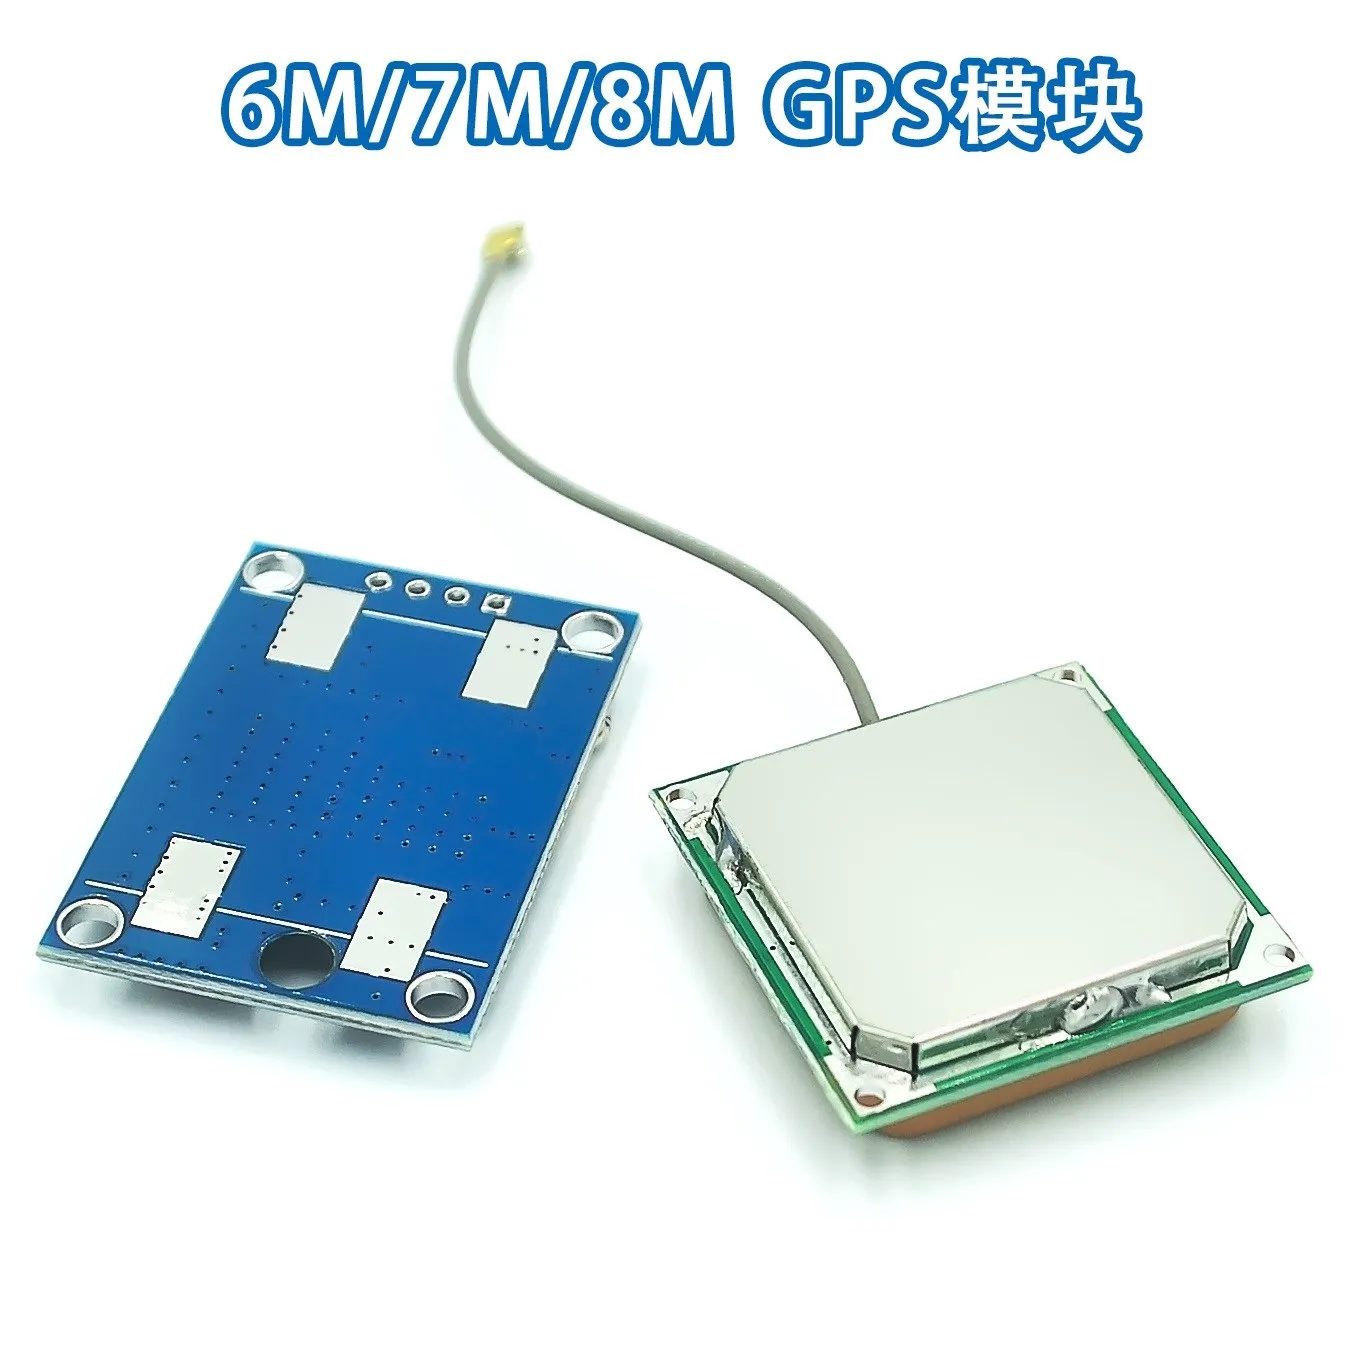 

10pcs GY-NEO6MV2 NEO-6M 7M 8M GPS Module NEO6MV2 With Flight Control EEPROM MWC APM2.5 Large Antenna For Arduino